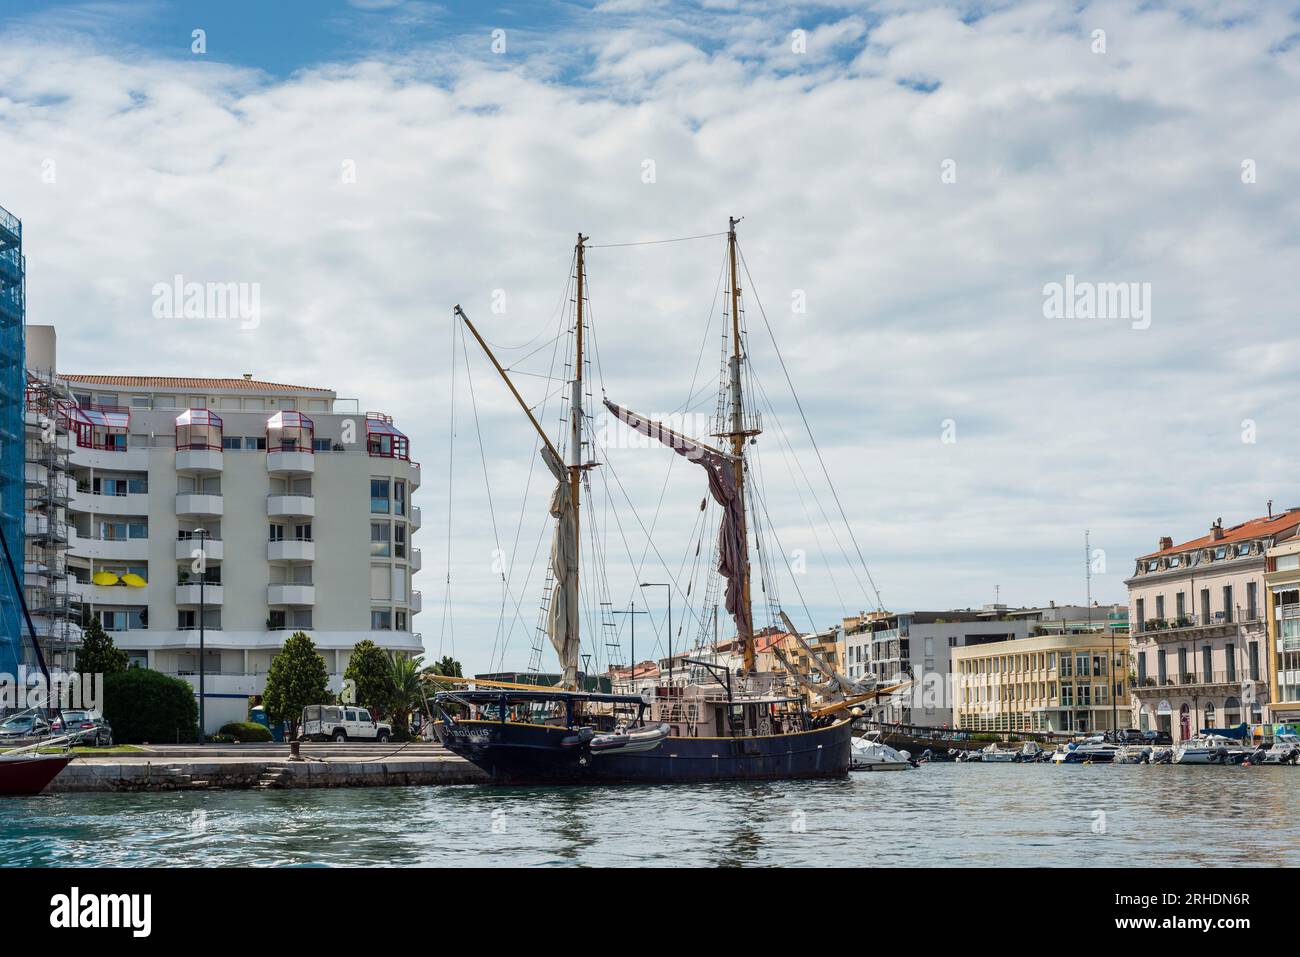 Tall Ship moored in canal, Sete, Herault, Occitanie, France Stock Photo